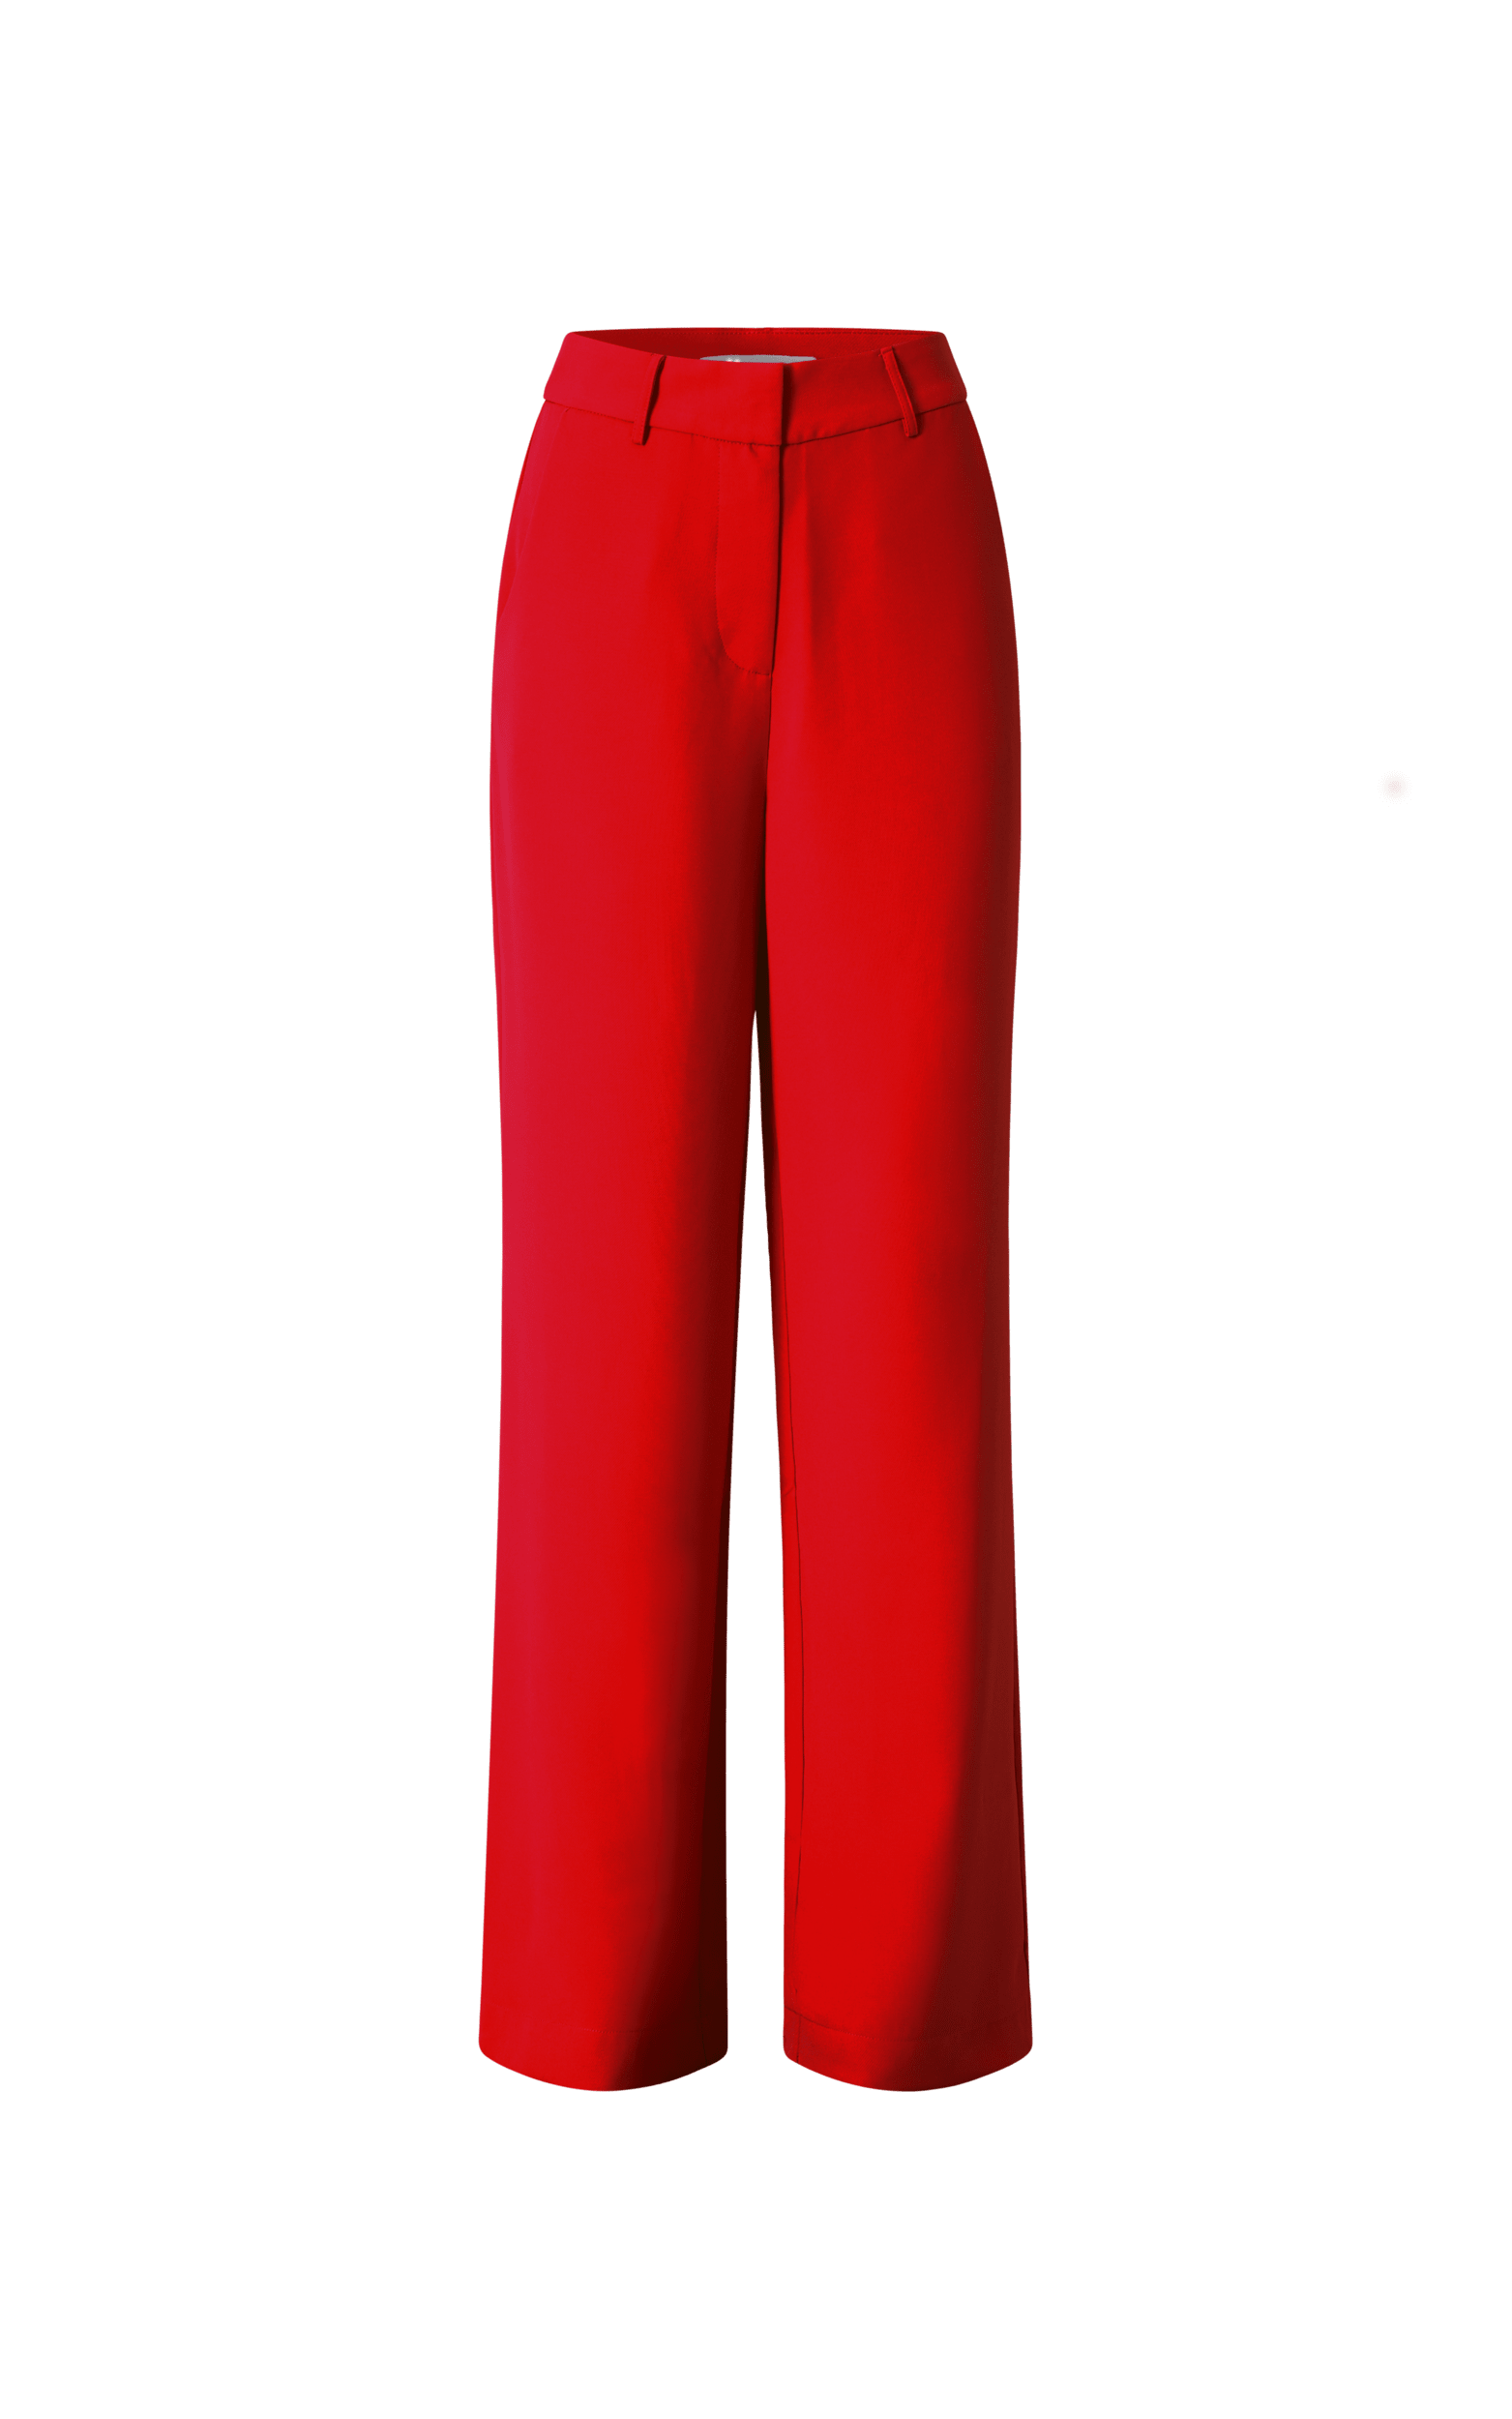 Red Jeans, Skinny, Wide-Leg + Flare Red Jeans